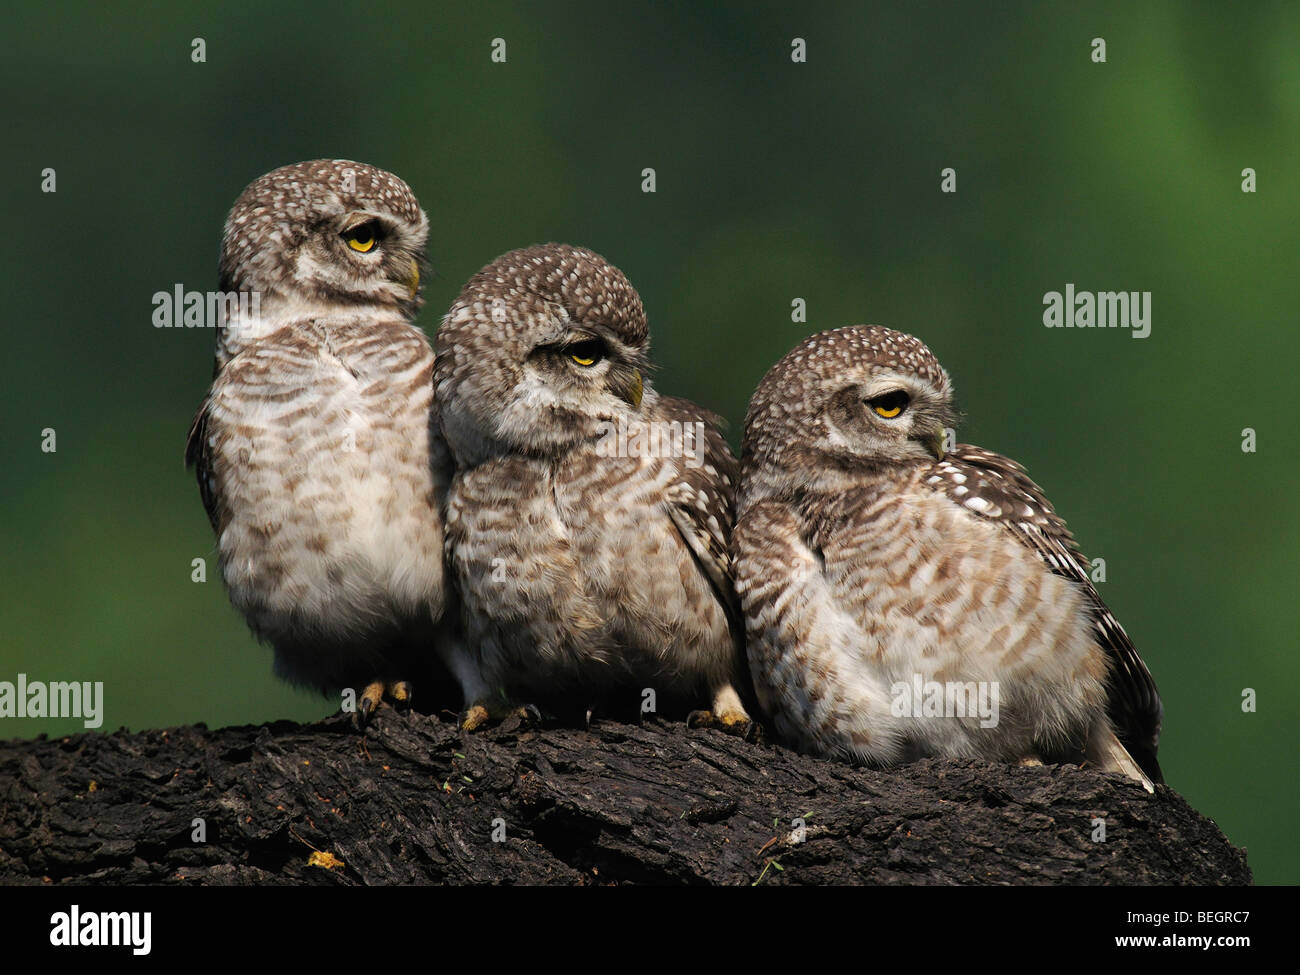 Spotted Owlets - Team Stock Photo